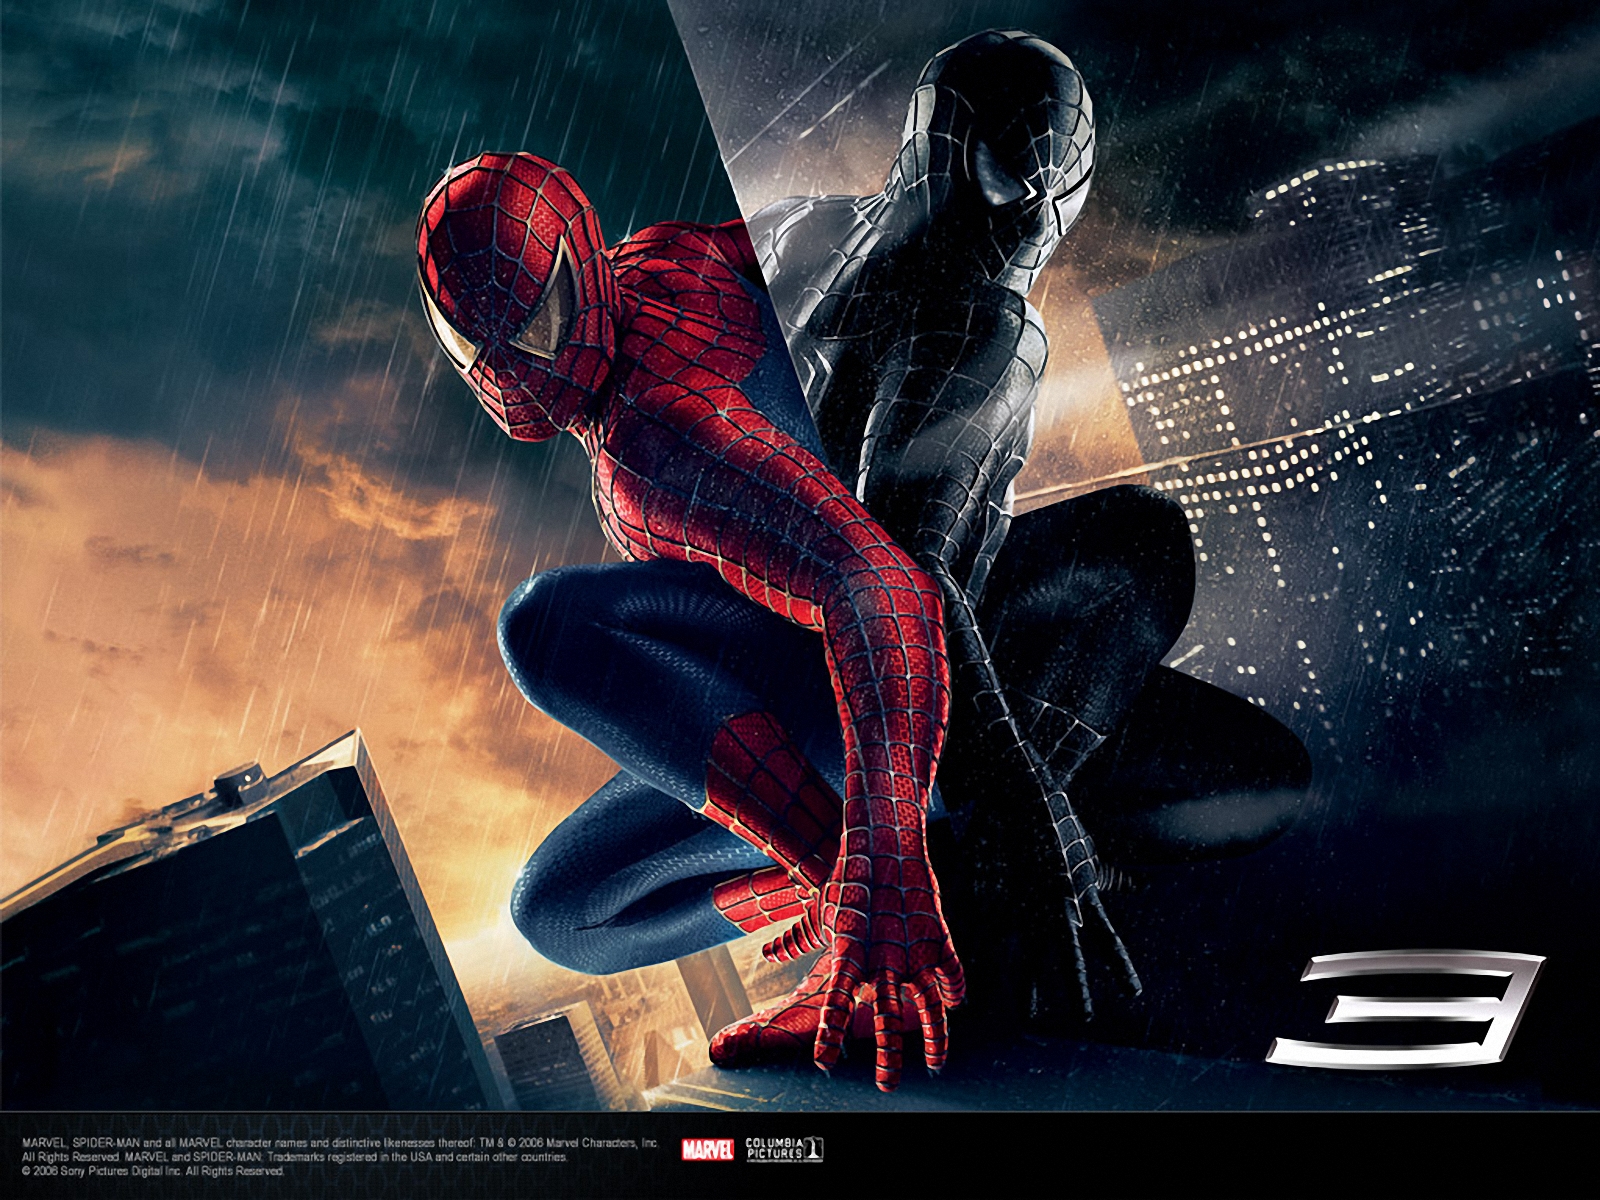 HD WALLPAPER For Pc and Mobile : Spiderman Wallpaper